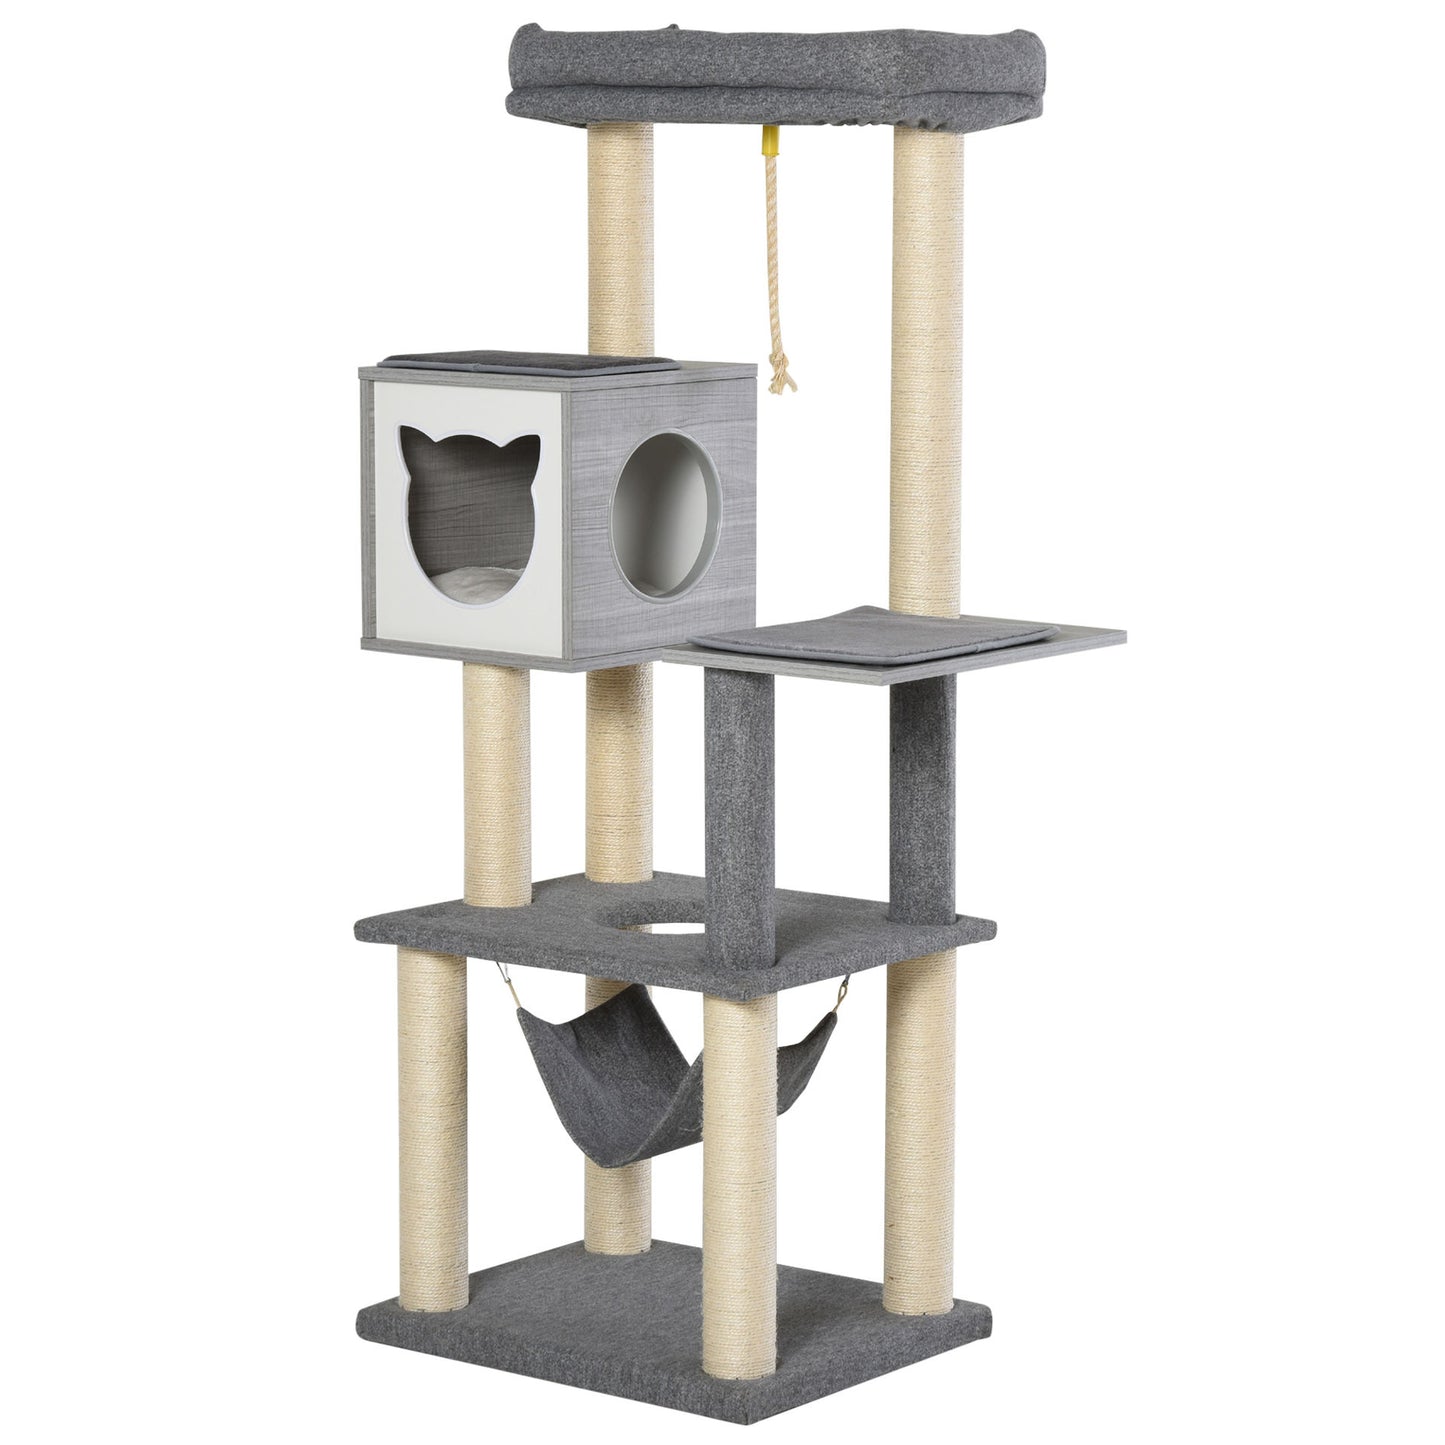 Nancy's The Bight Scratching Post - Climbing Tree for Cats Multi-level scratching post with litter box